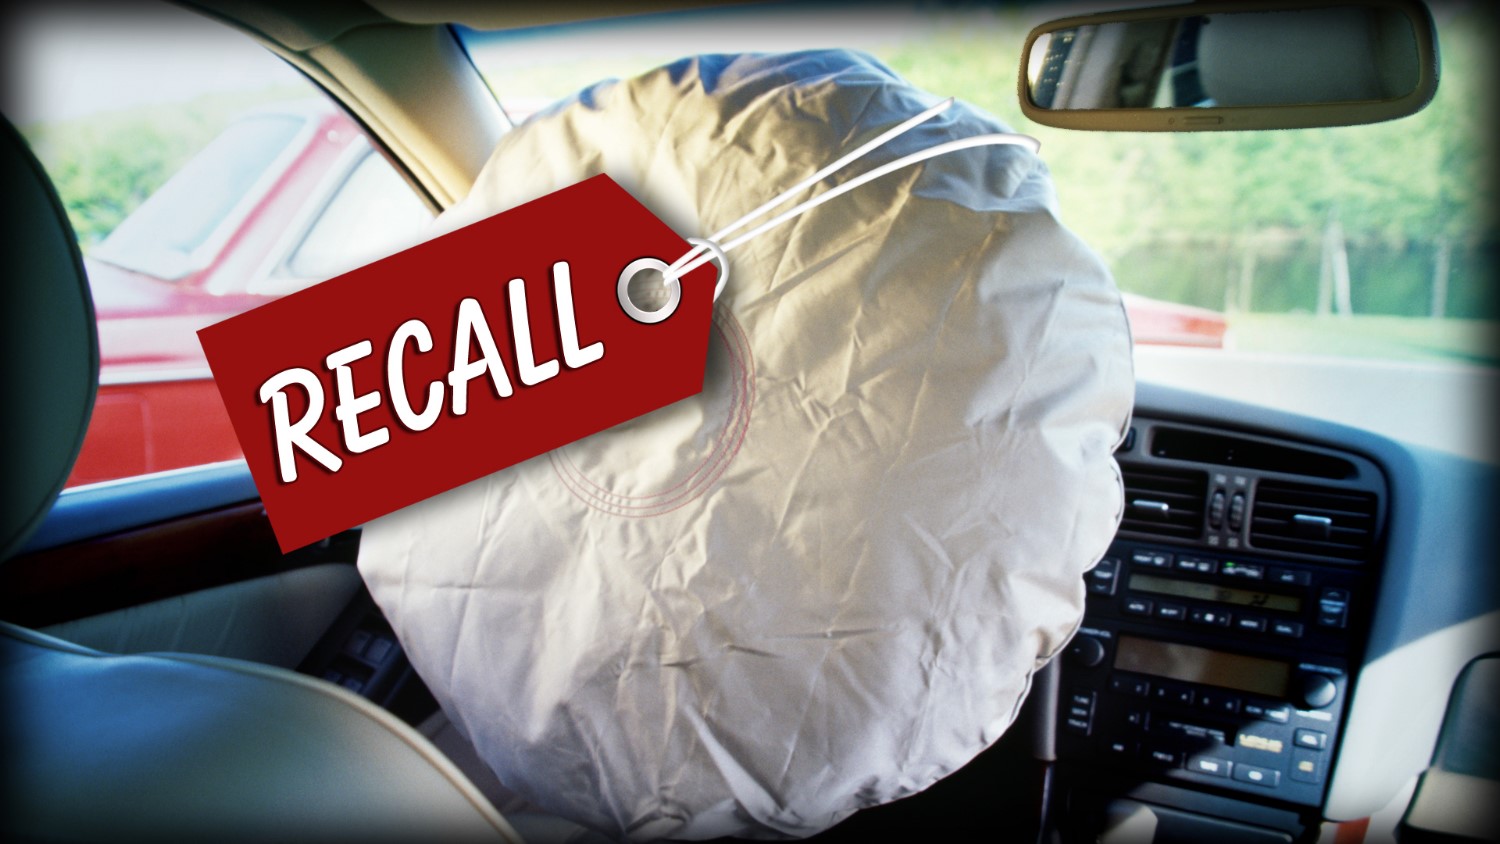 Another Airbag recall